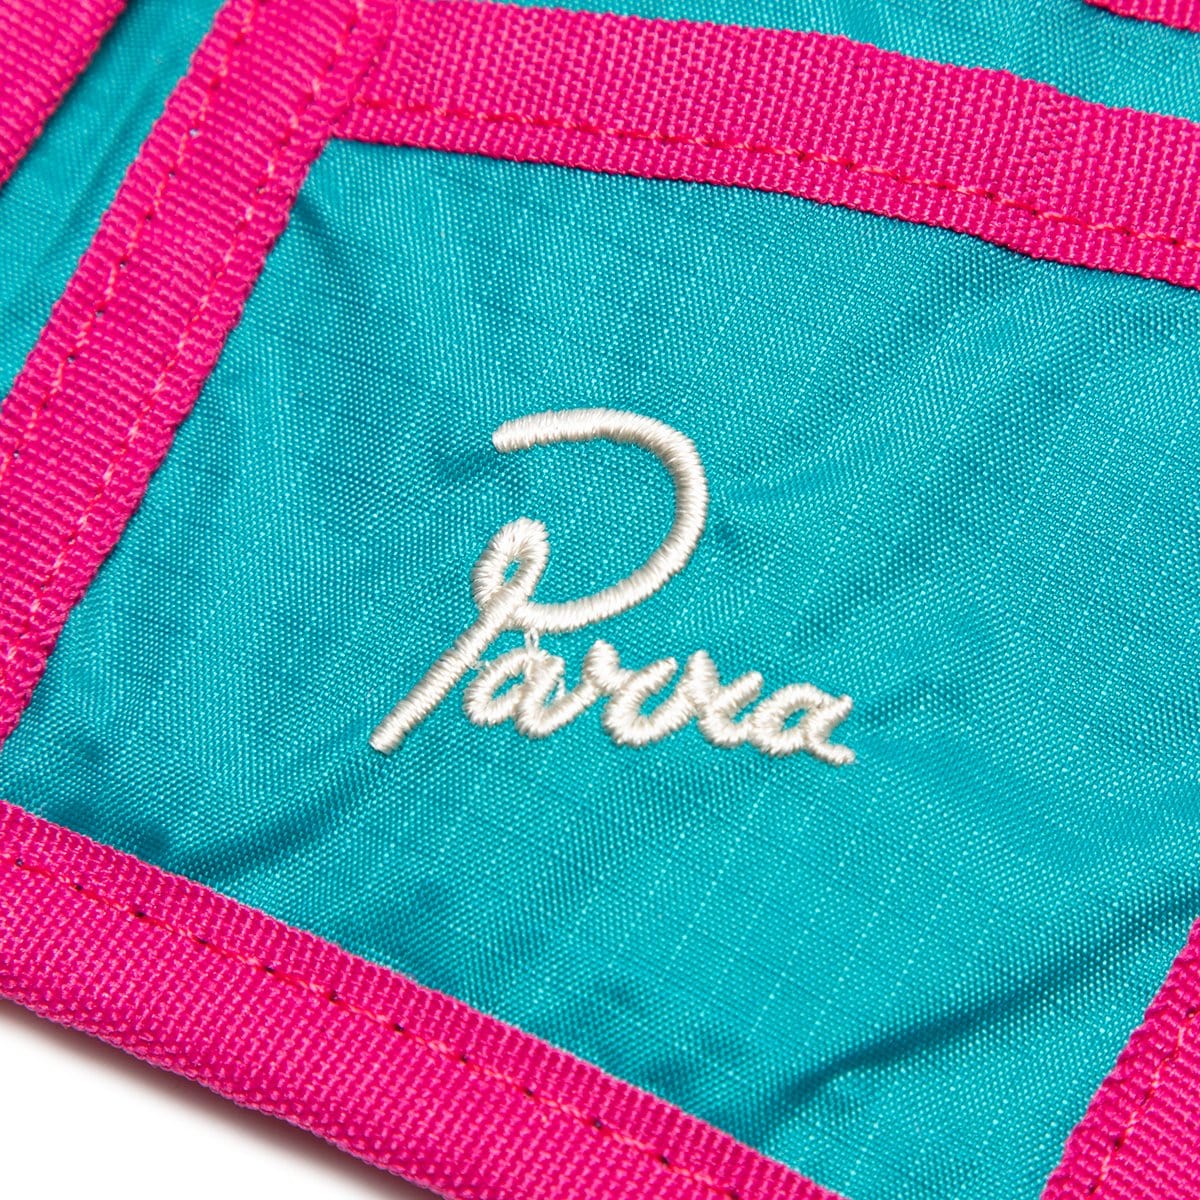 By Parra Bags & Accessories CARIBBIAN / O/S DOGFACE WALLET